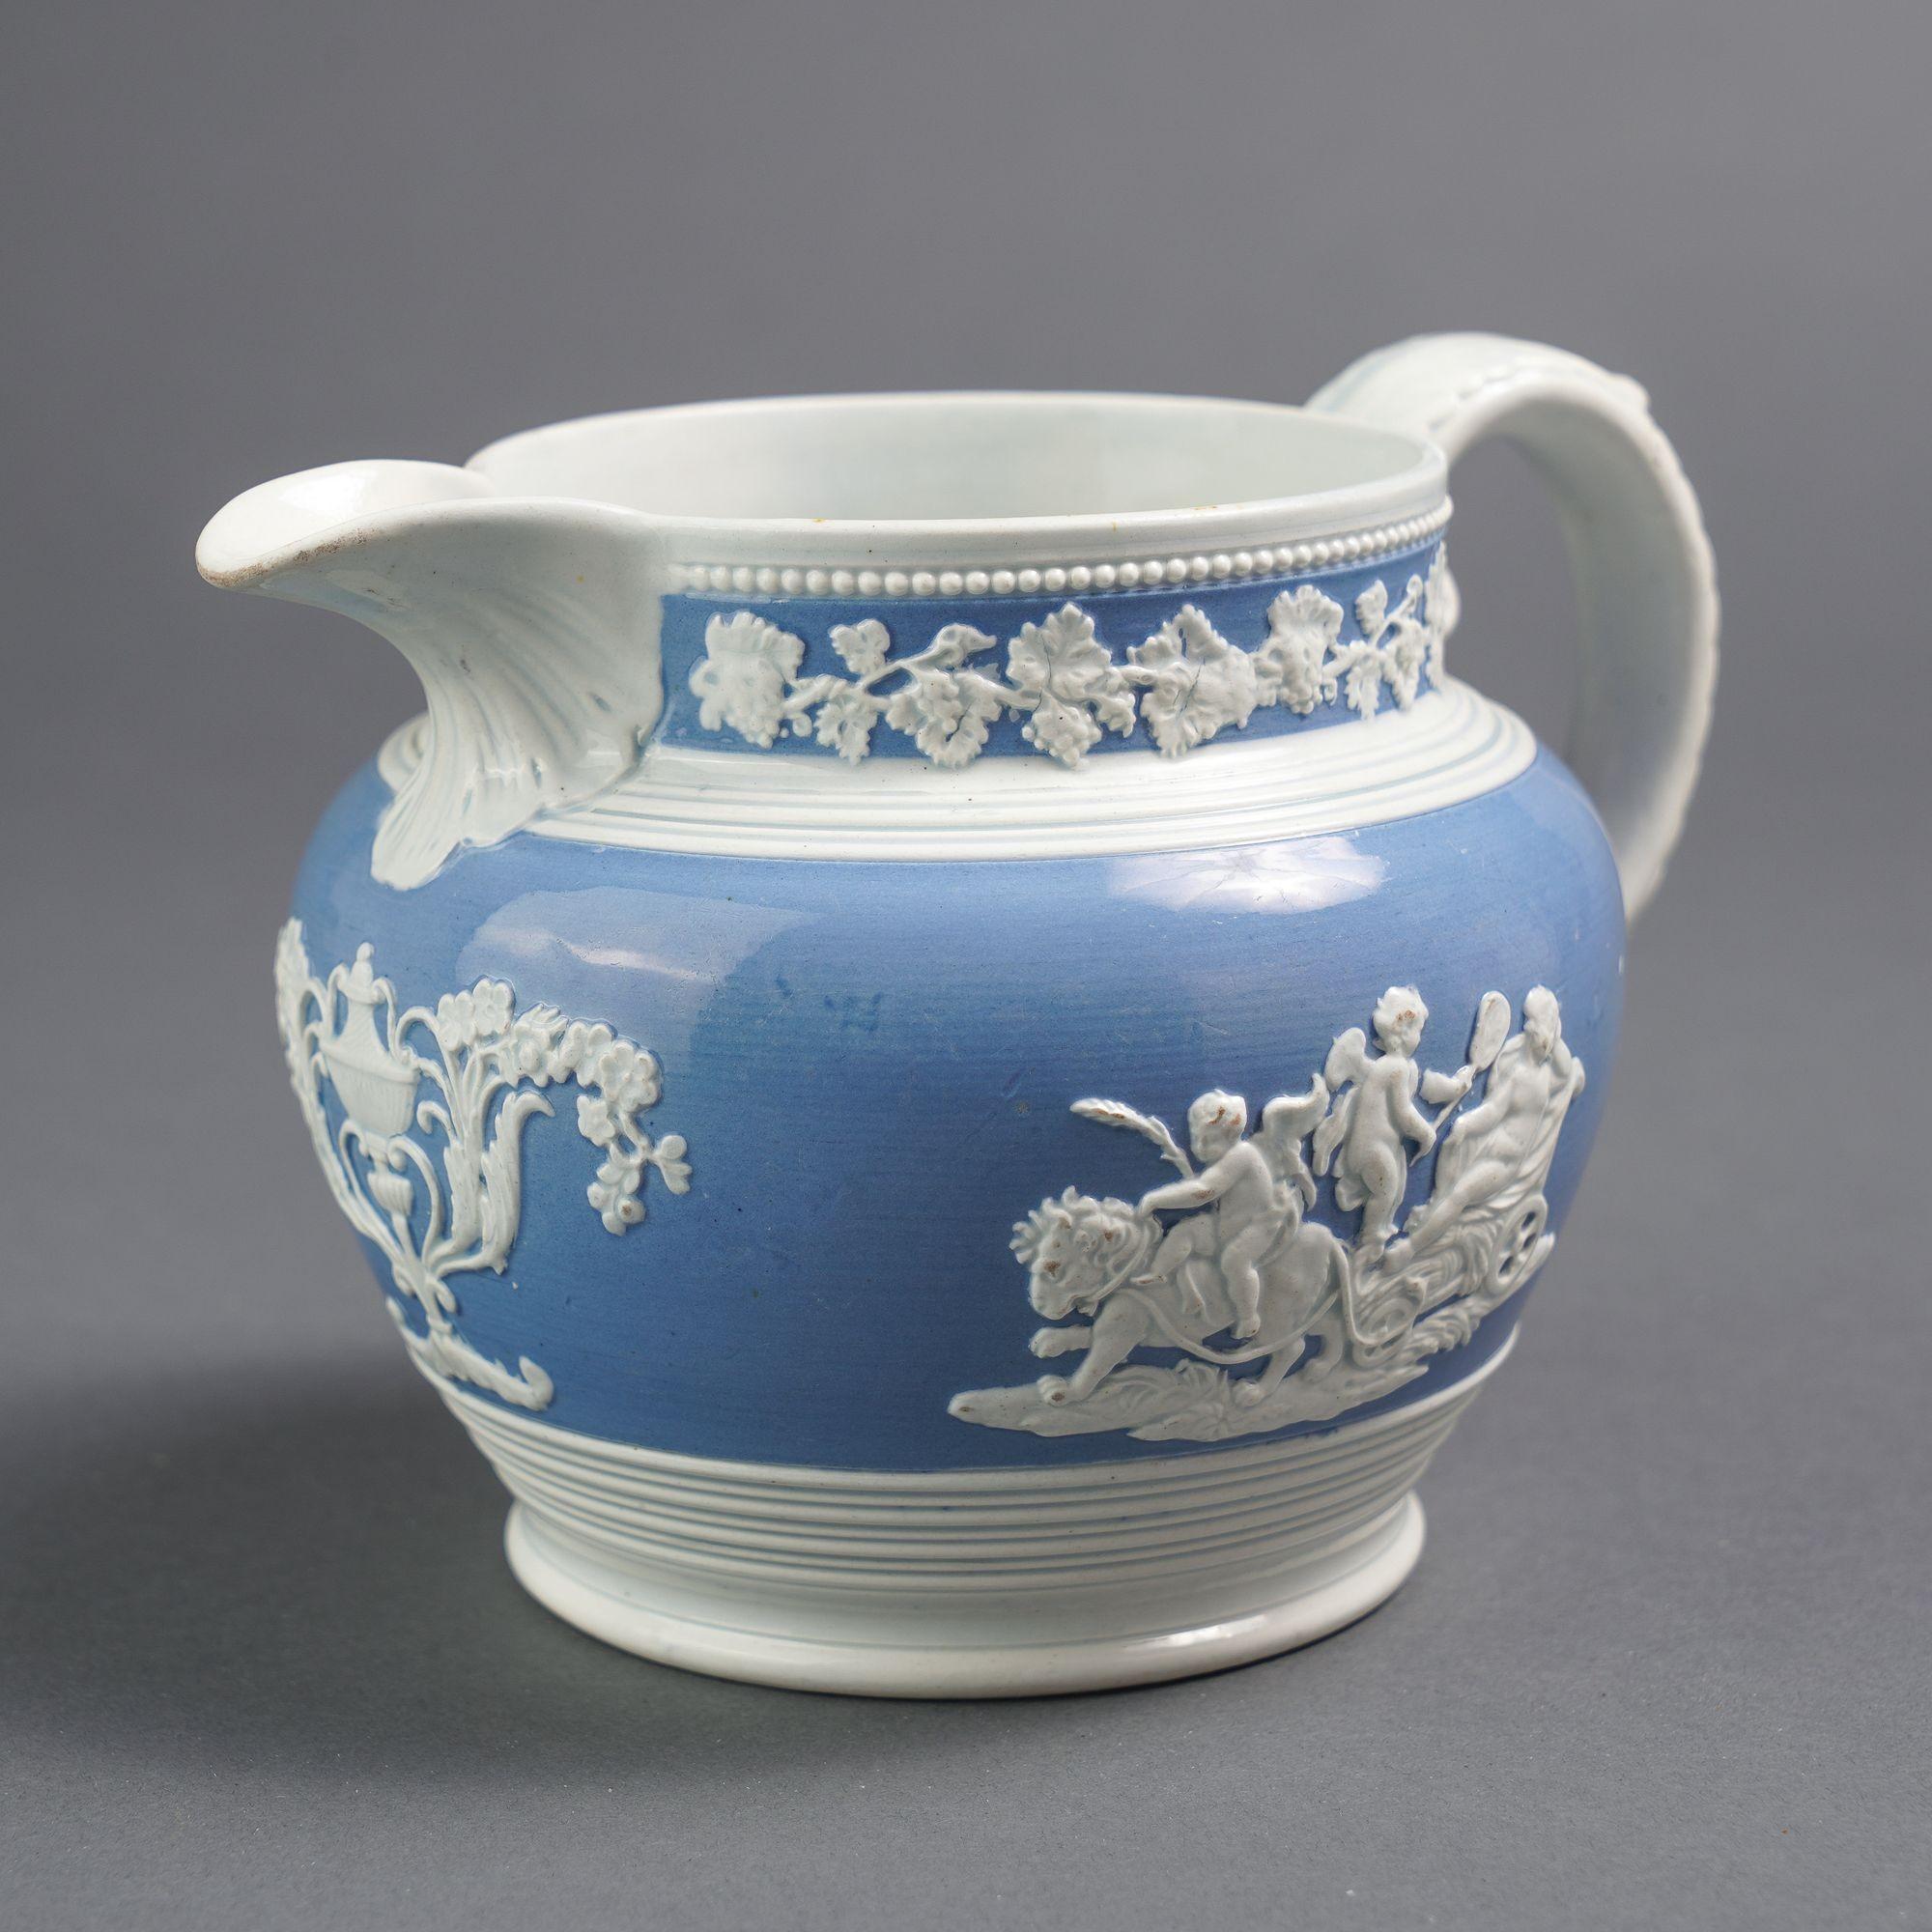 English Staffordshire pearlware pitcher by Chetham & Woolley, 1820-30 For Sale 2